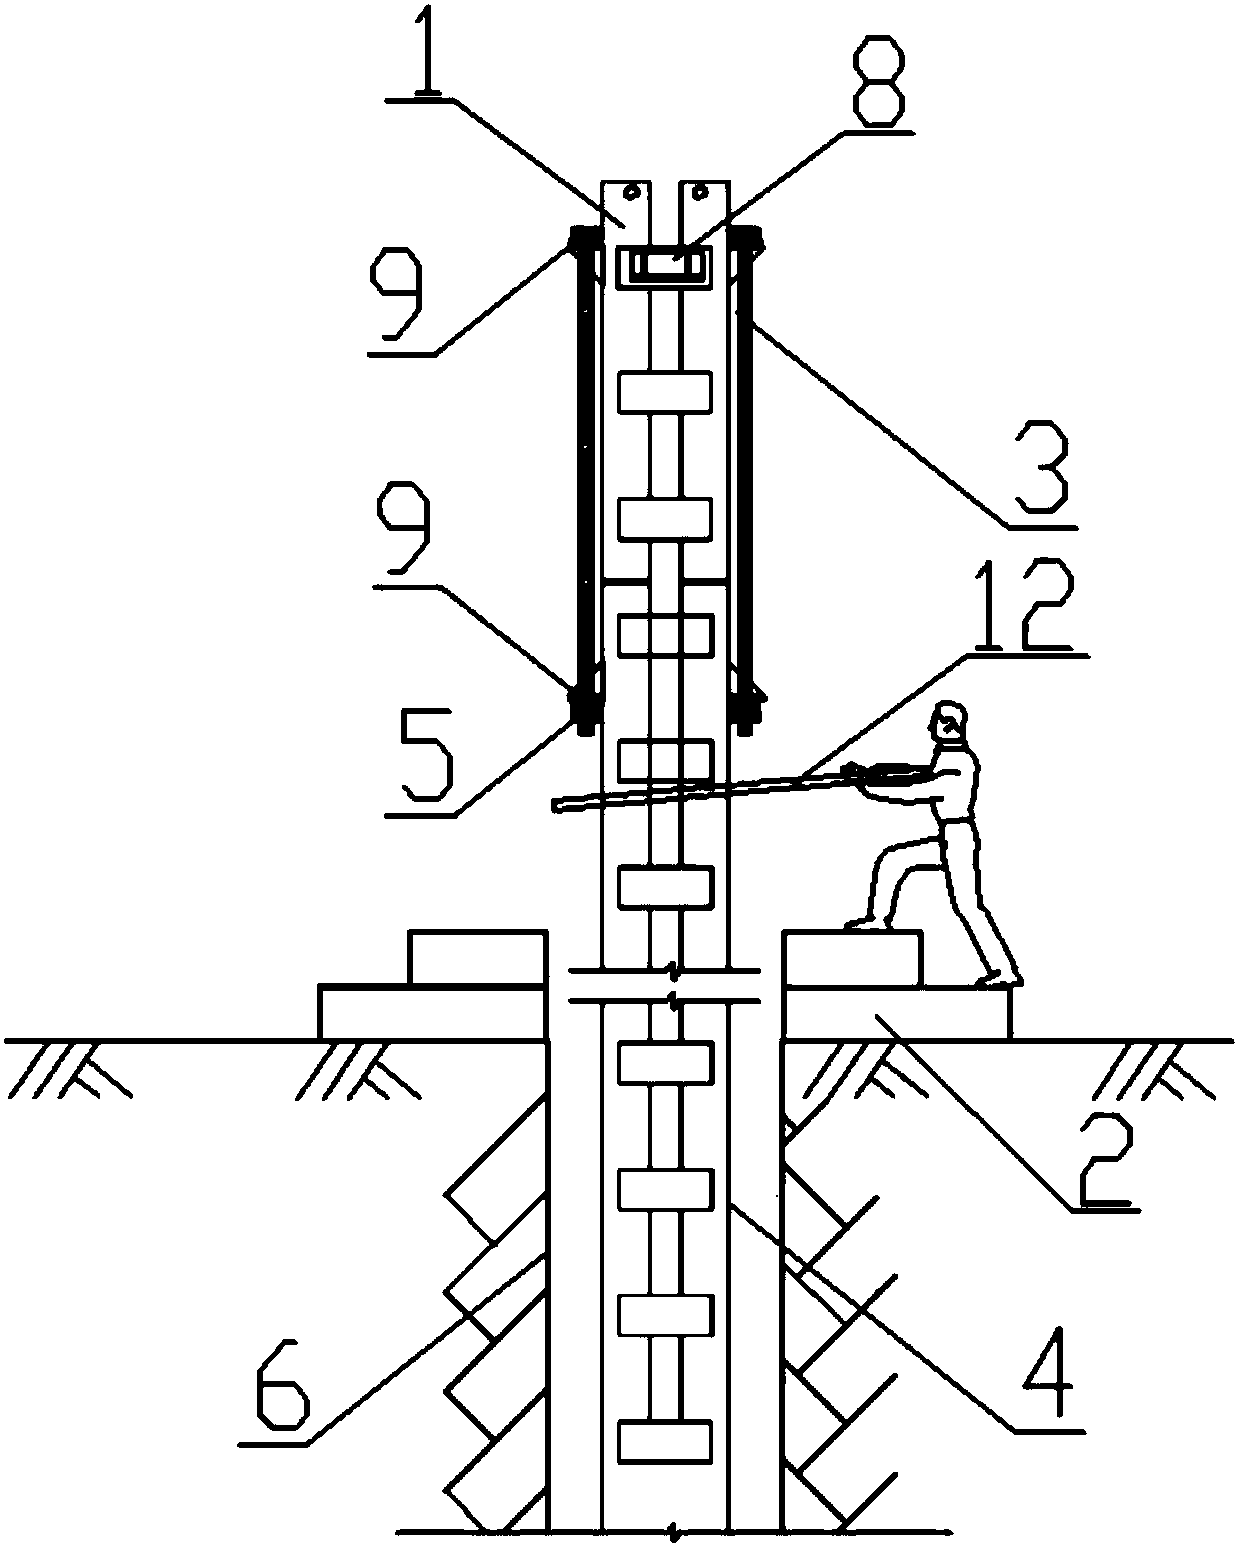 A method of using a positioning and steering control system for vertical lattice columns in deep foundation pit enclosure